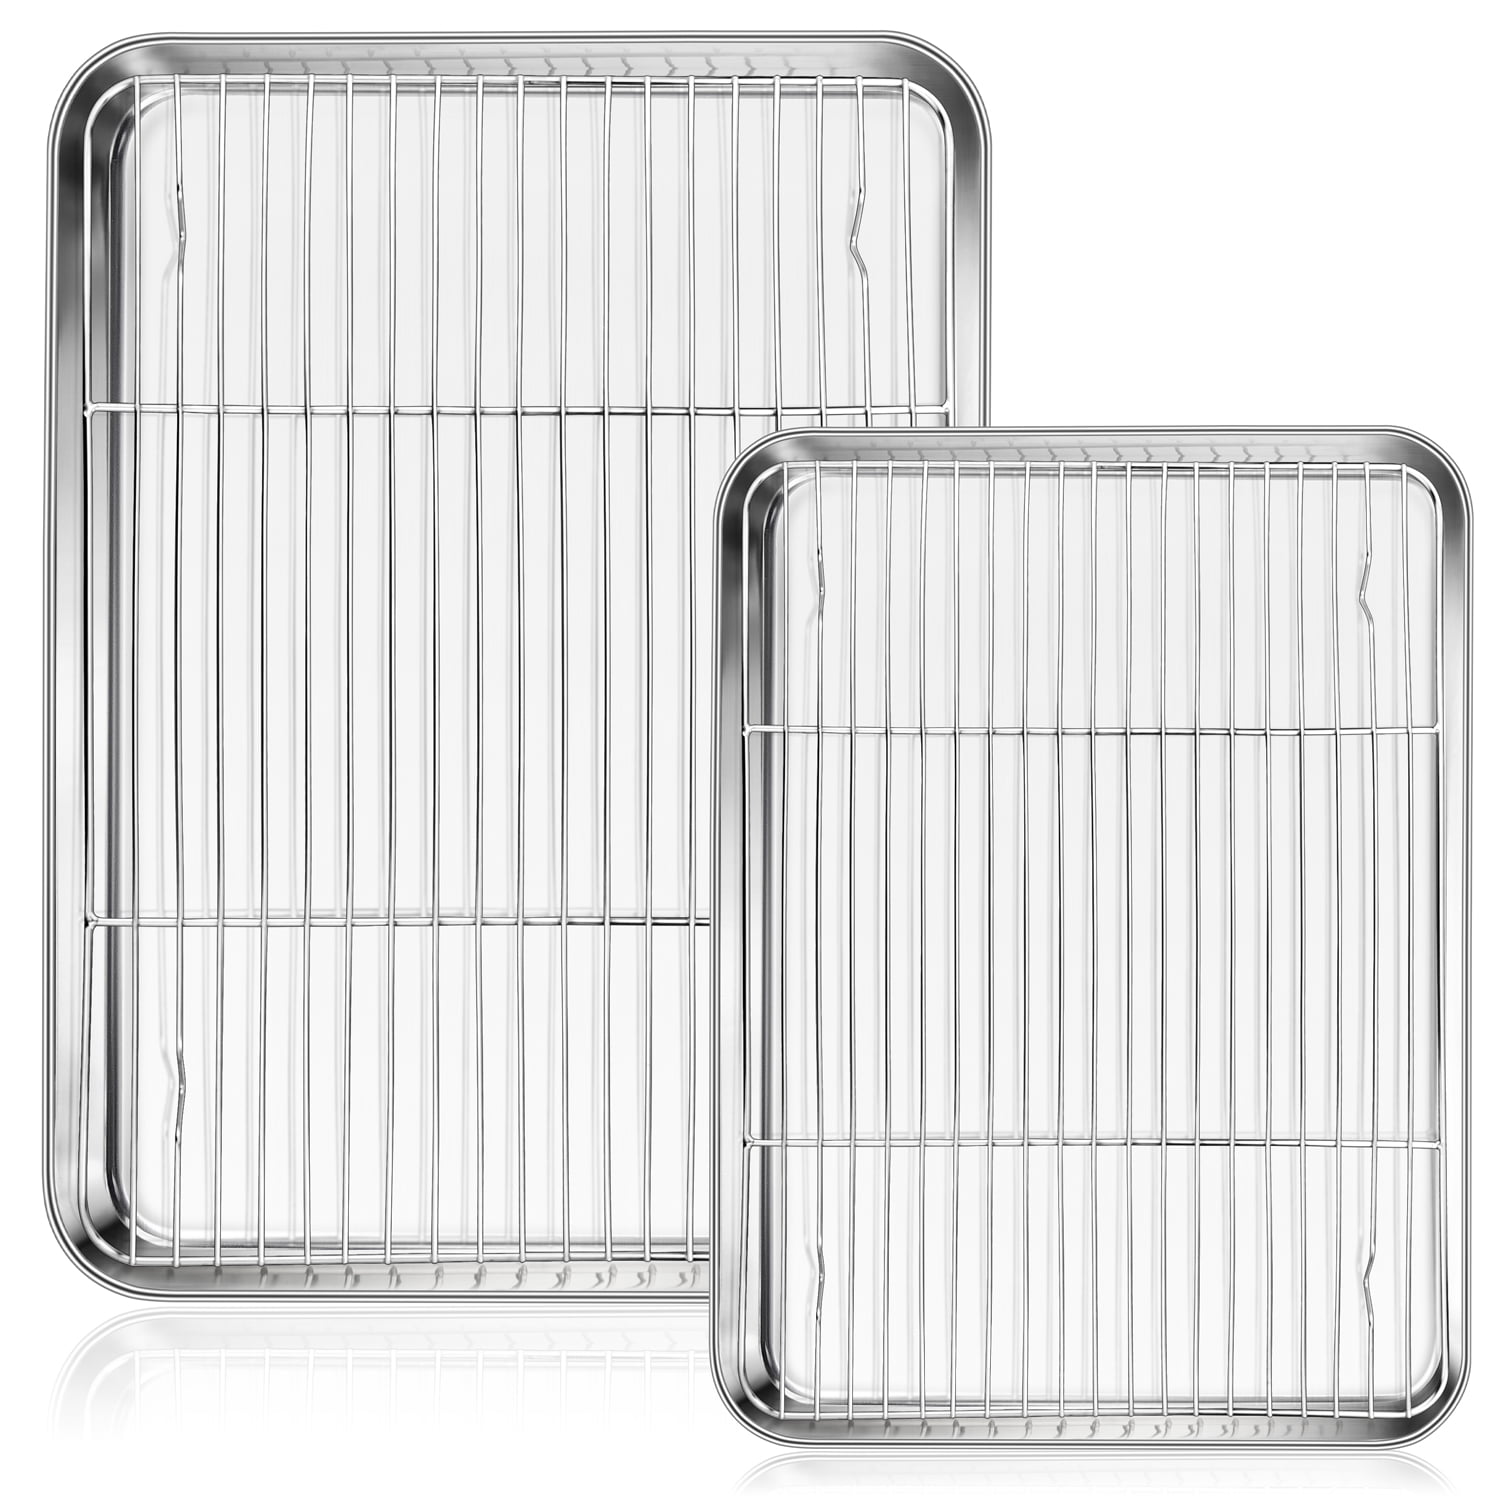  Quarter Sheet Pan with Wire Rack Set [2 Baking Sheets + 2  Cooling Racks], CEKEE Stainless Steel Cookie Sheets for Baking with Baking  Rack, Nonstick Heavy Duty & Dishwasher Safe, Size